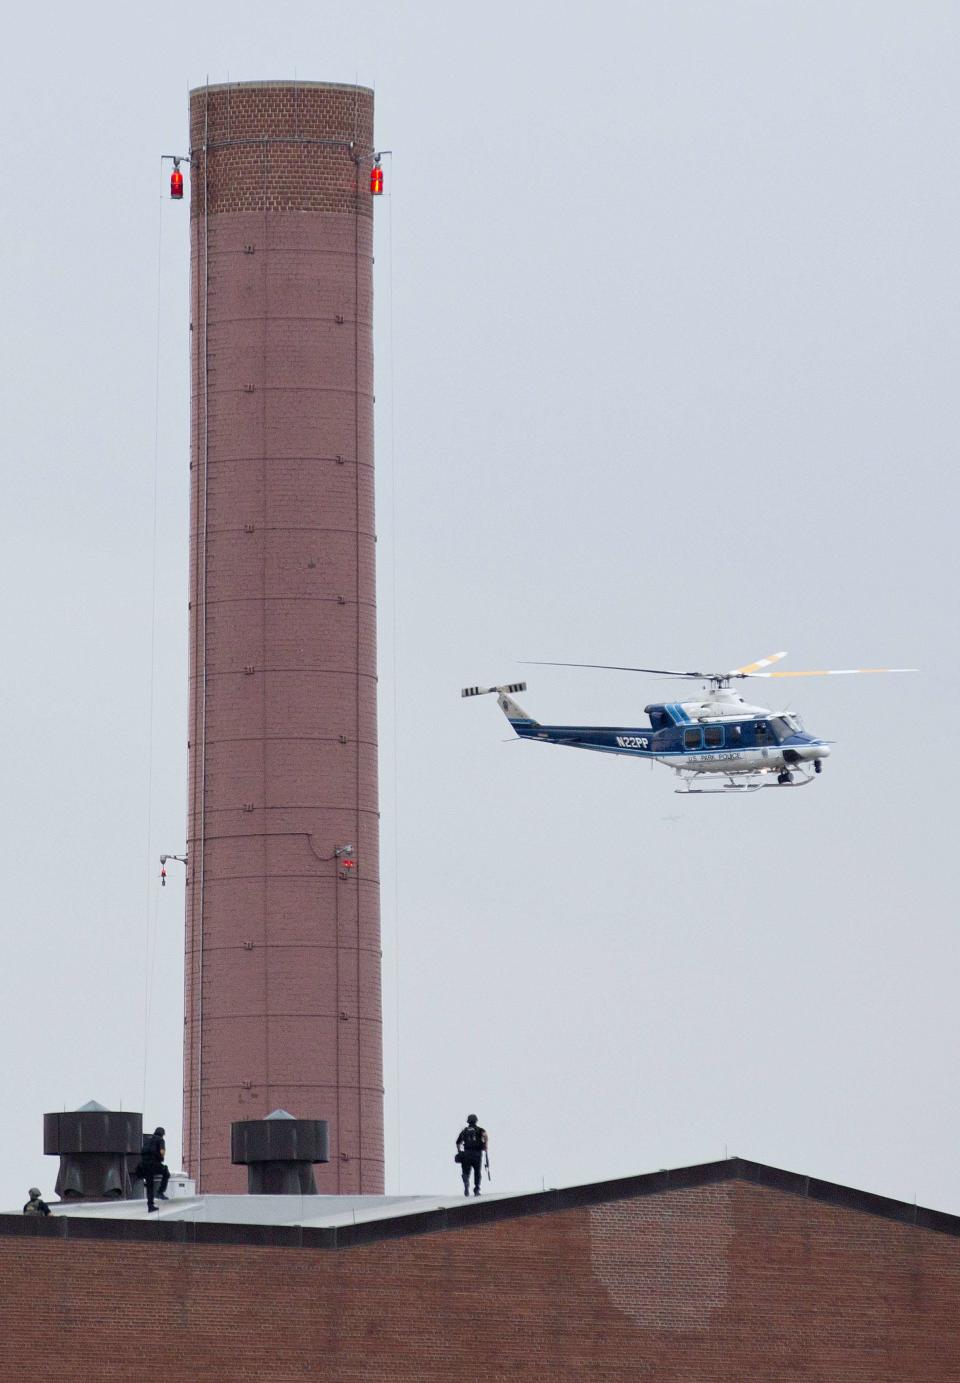 A police helicopter flies overhead as police walk on the roof of a building as they respond to a shooting at the Washington Navy Yard in Washington September 16, 2013. A gunman shot five people at the U.S. Navy Yard on Monday, including two law enforcement officers, and the shooter was being sought in a building housing the Naval Sea Systems Command headquarters, officials said. (REUTERS/Joshua Roberts)